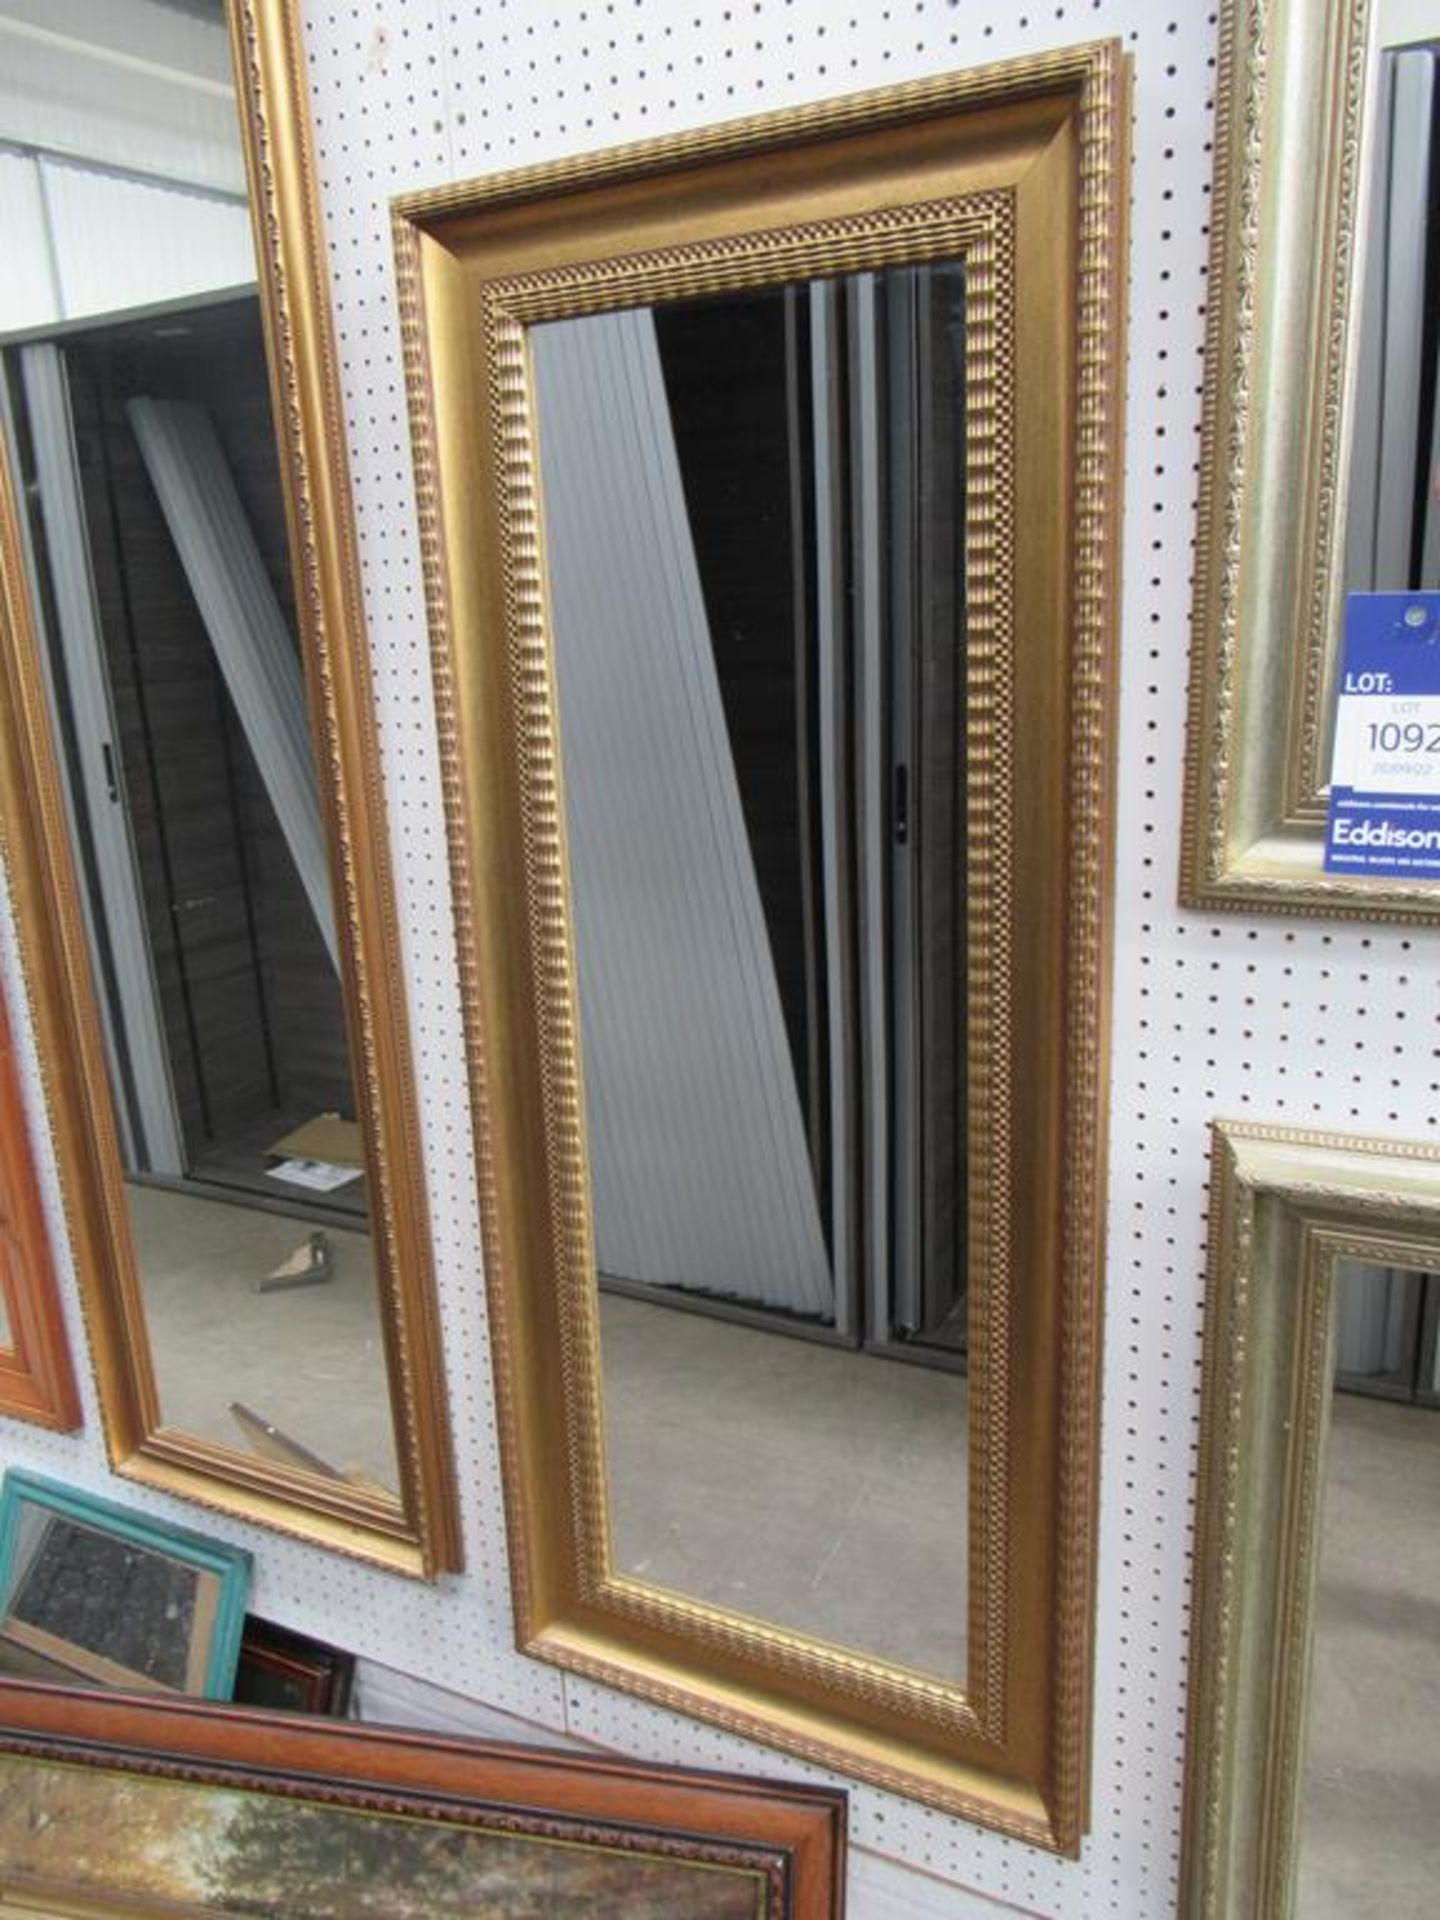 4x Assorted Framed Mirrors - Image 2 of 5